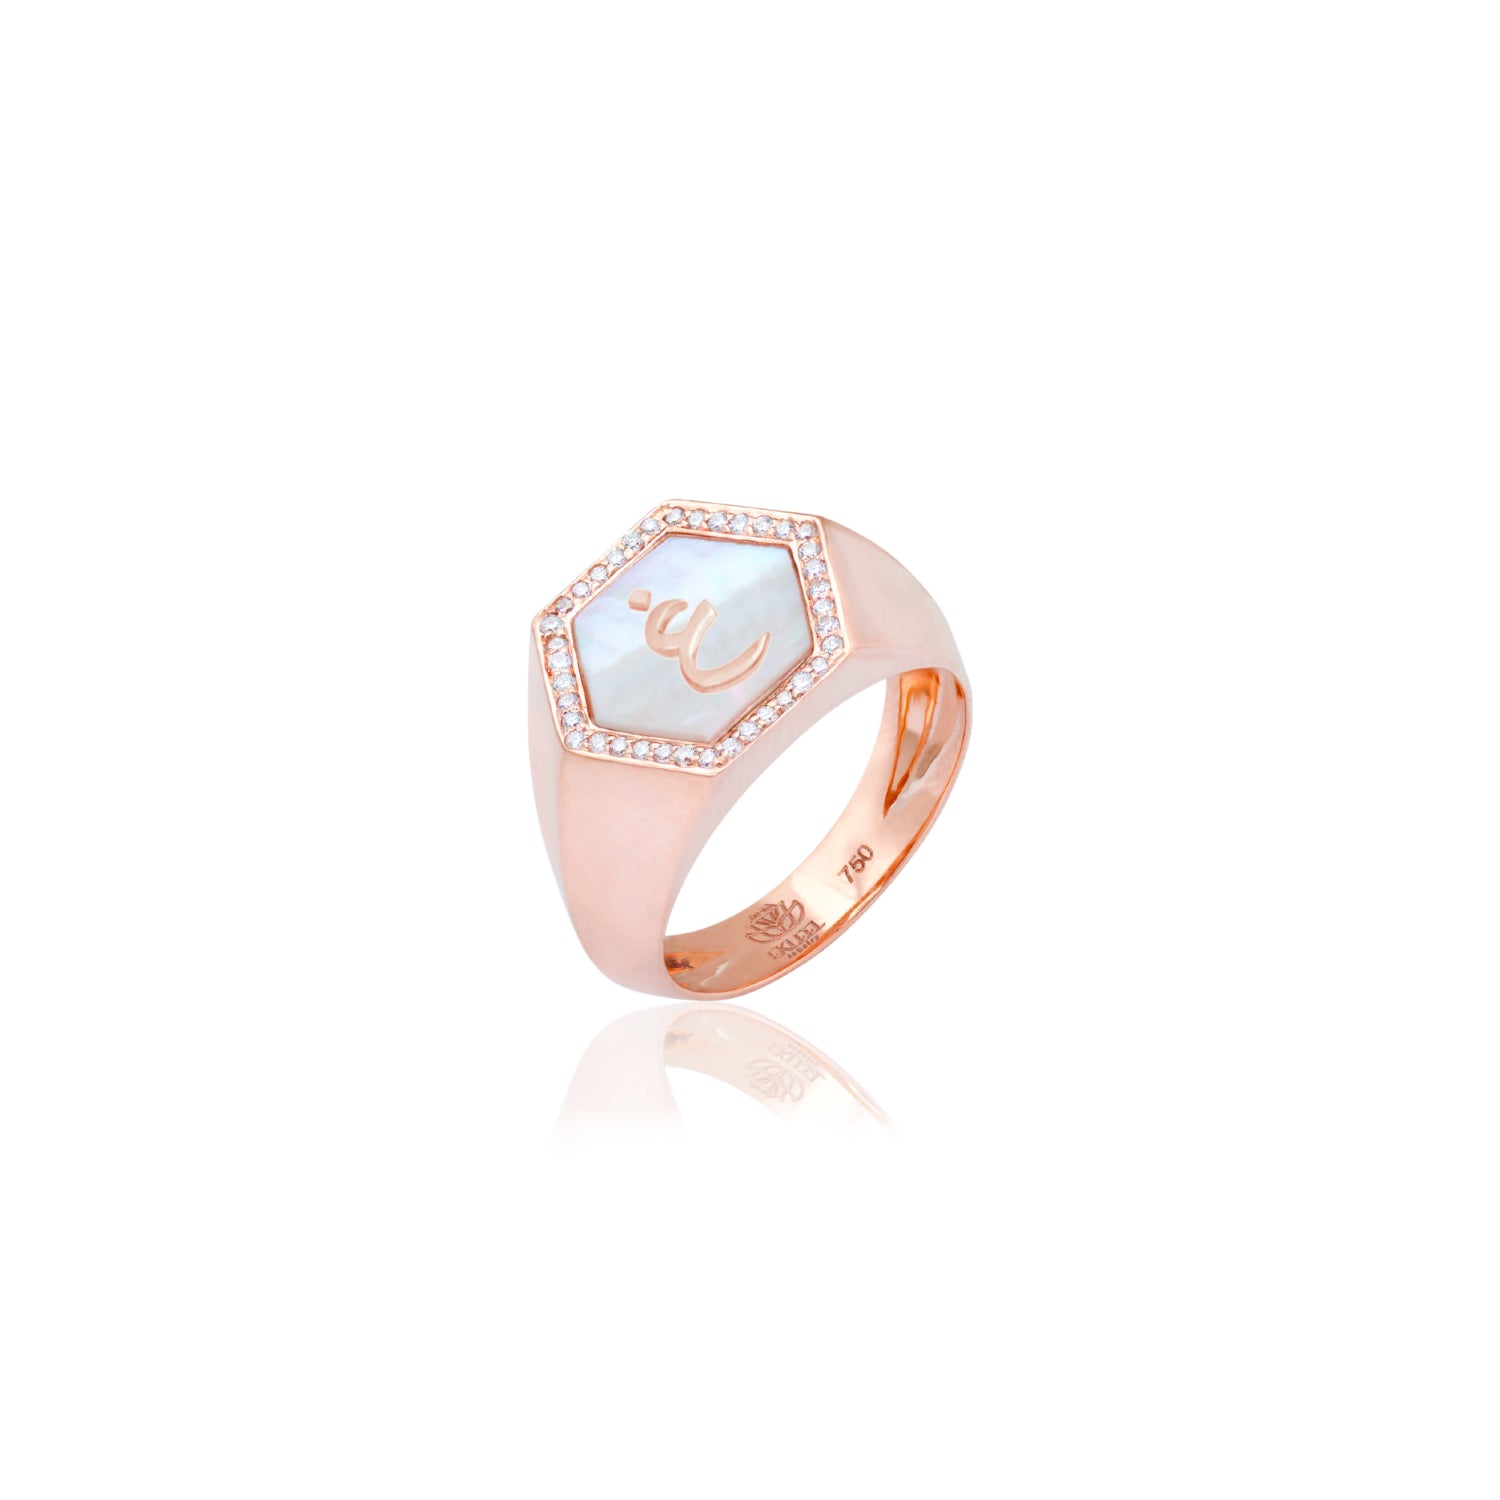 Qamoos 2.0 Letter غ White Mother of Pearl and Diamond Signet Ring in Rose Gold